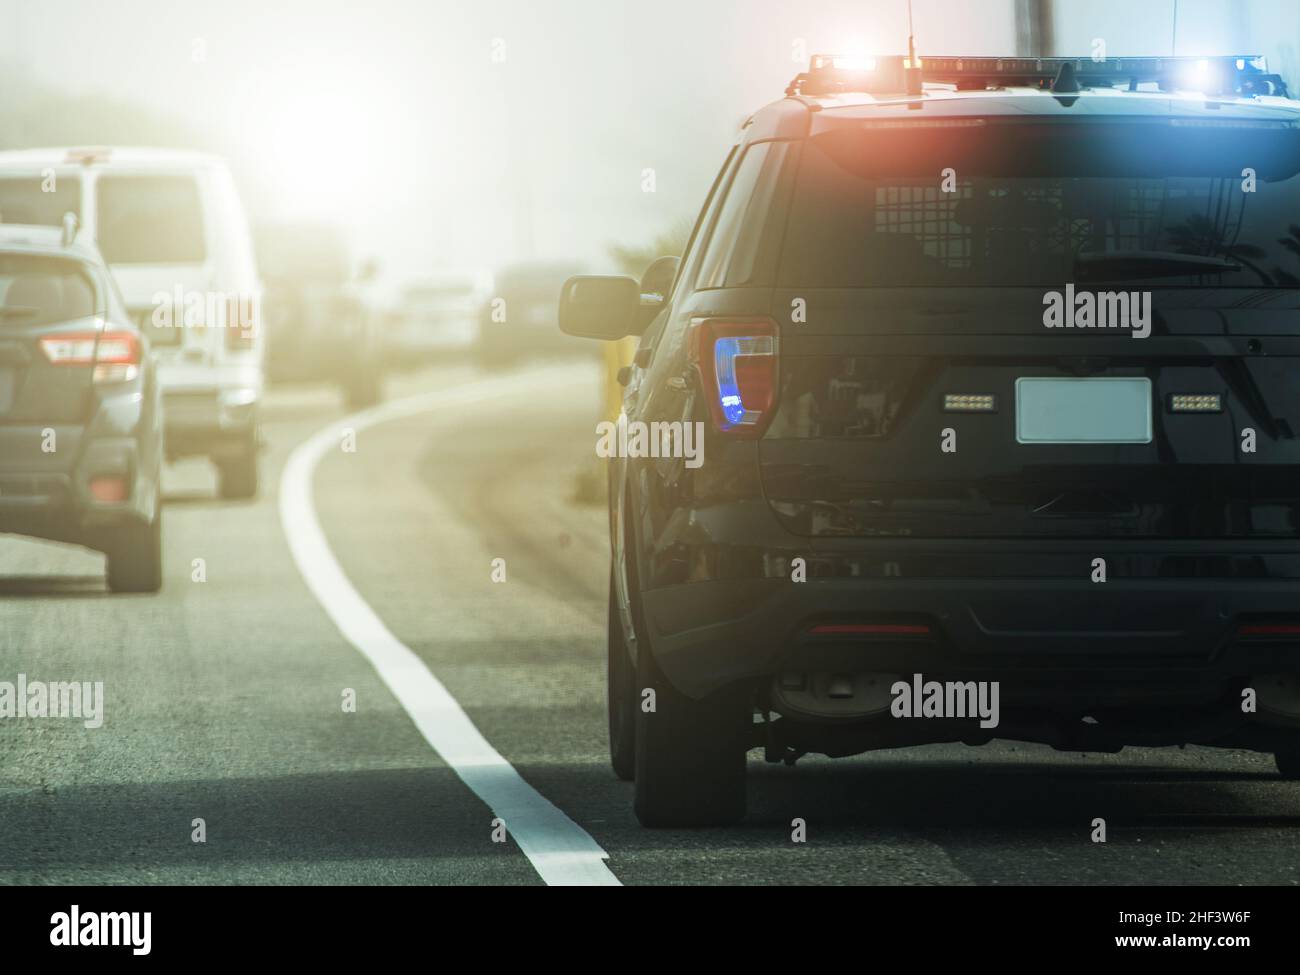 Flashing Lights of American Modern Highway Police Patrol Cruiser on Side of a Road. Rear View. Transportation and Police Enforcement Theme. Stock Photo